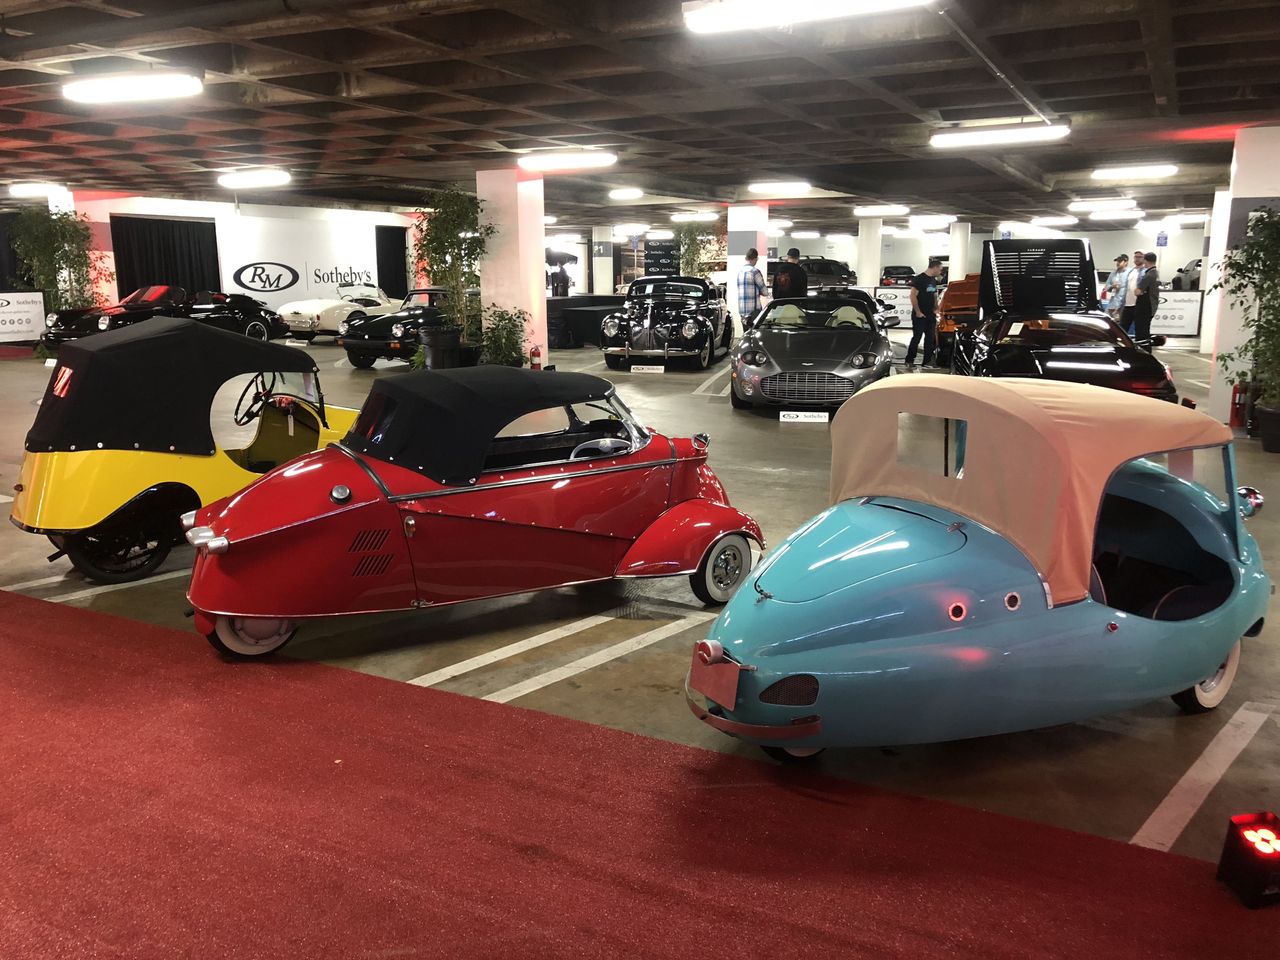 Many microcars employed a reverse trike wheel setup like the two examples on the right